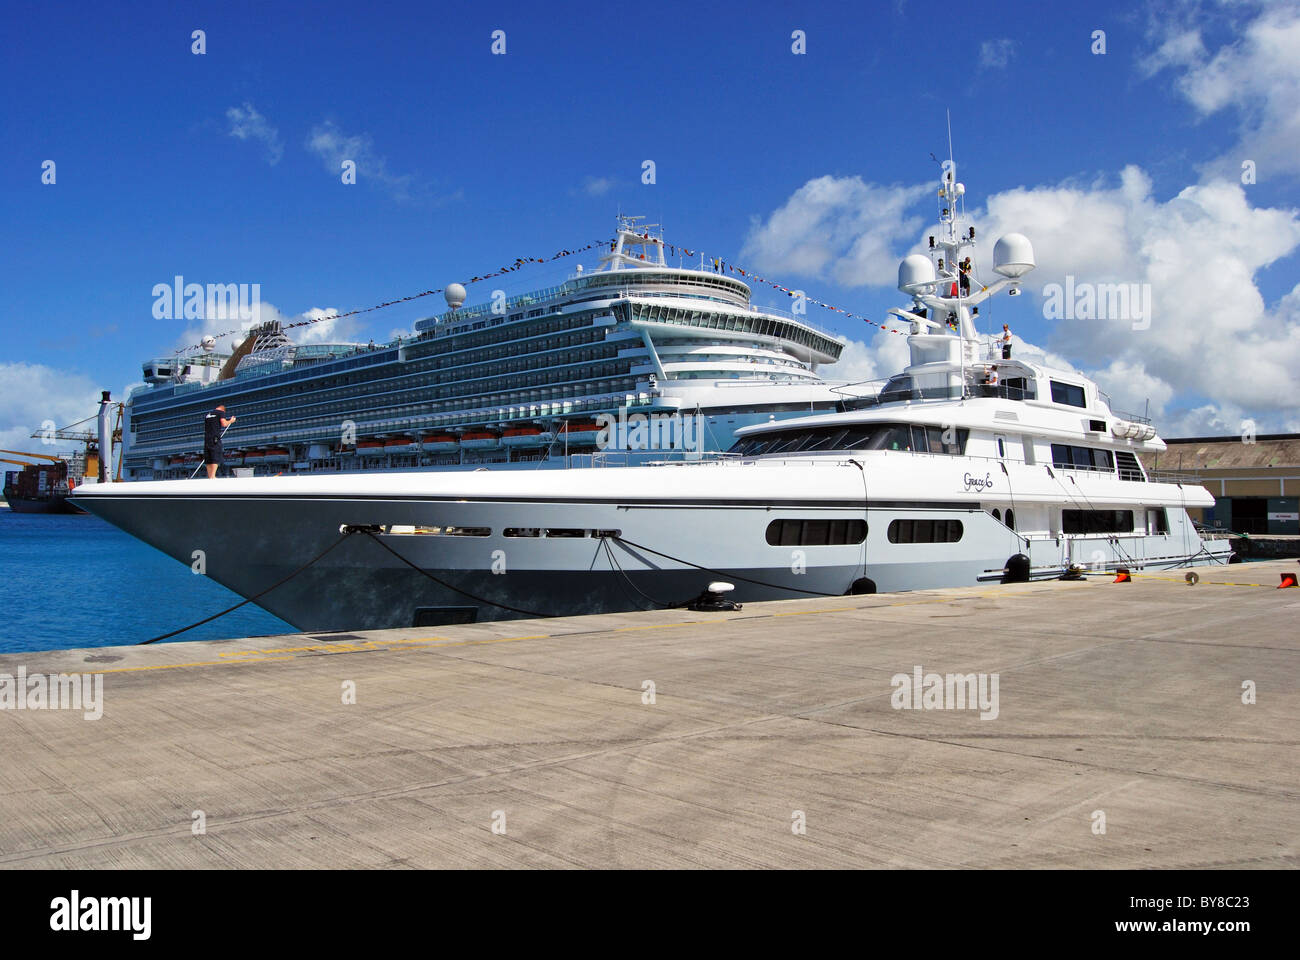 Yacht with cruise liner to rear, Bridgetown, Barbados, Caribbean. Stock Photo